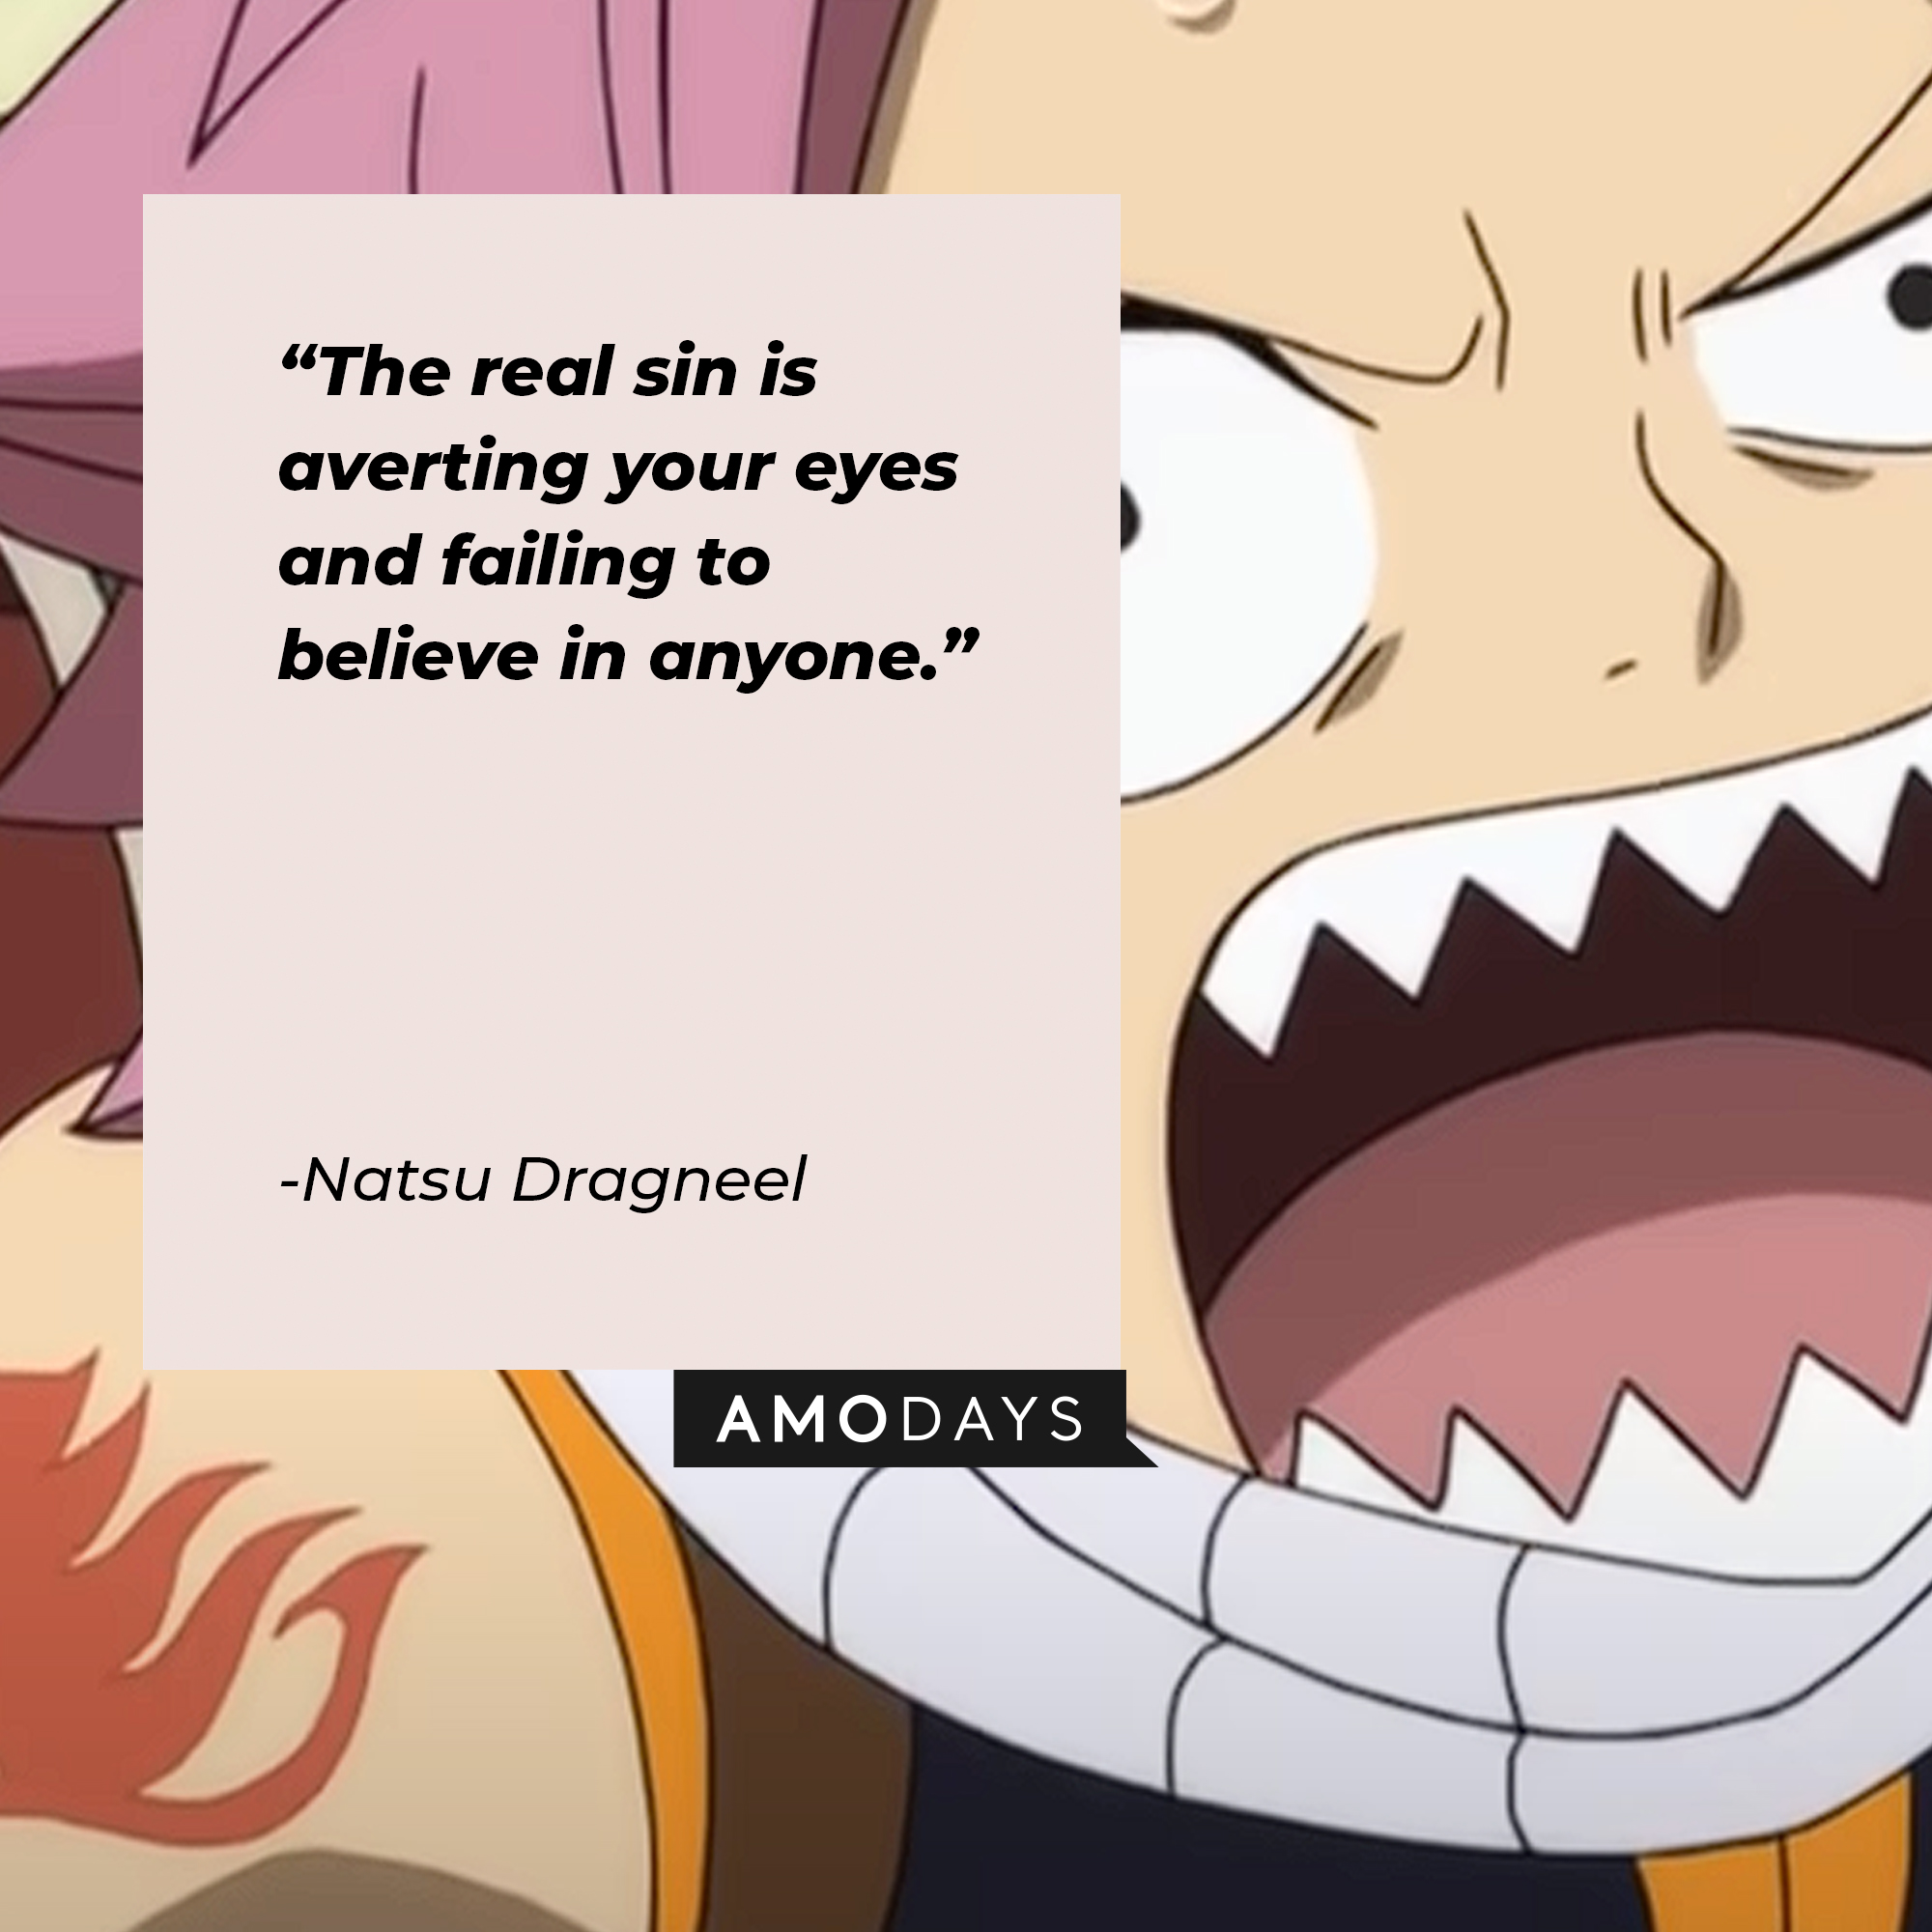 Natsu Dragneel's quote: "The real sin is averting your eyes and failing to believe in anyone." | Image: AmoDays